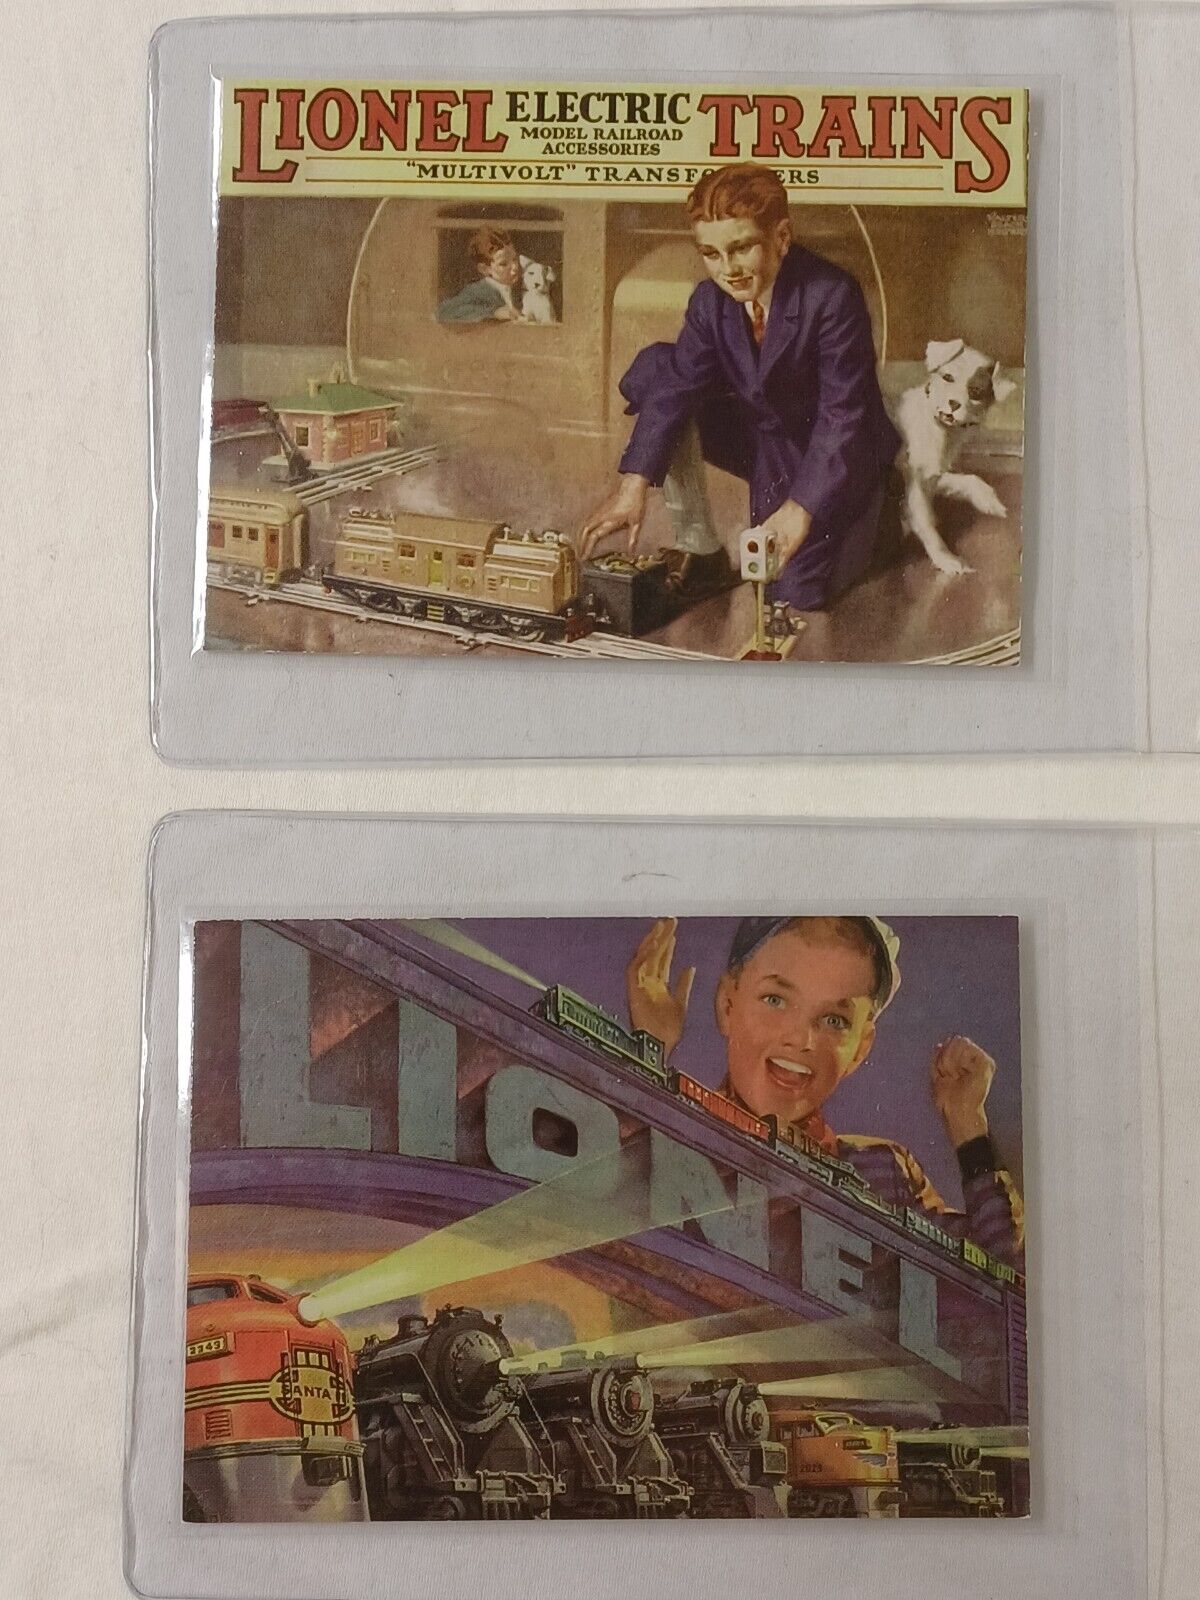 Lionel Legendary Trains Collector Cards DuoCards Promo Card Set Complete 1997 